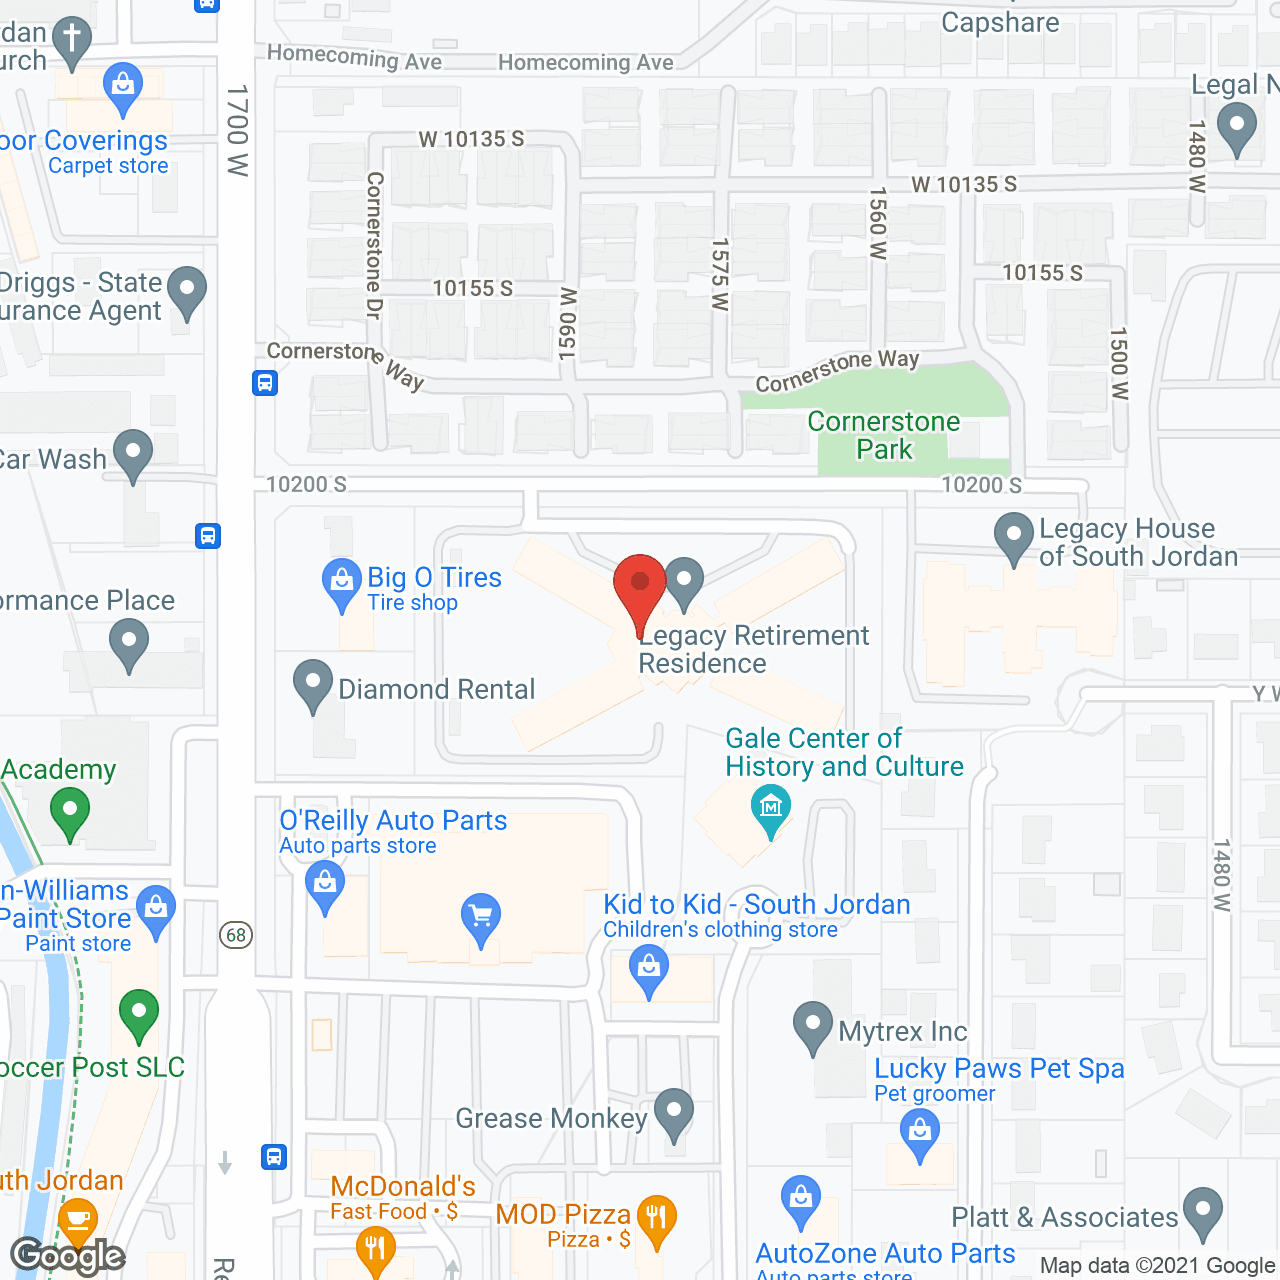 Legacy Retirement Residence in google map